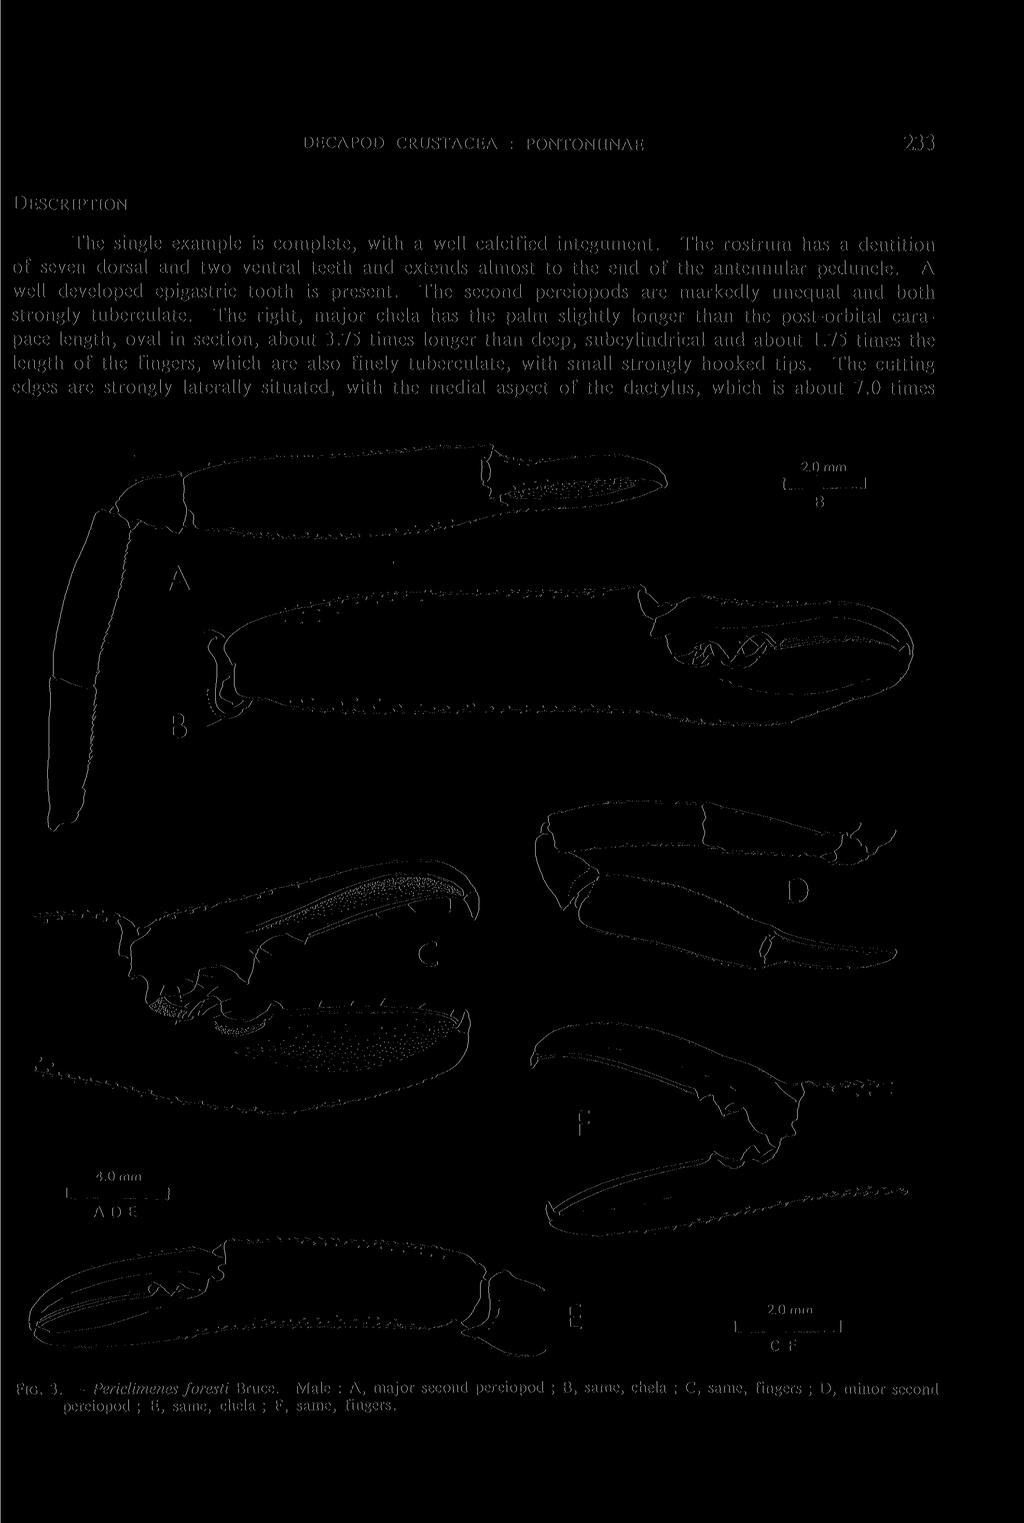 DECAPOD CRUSTACEA : PONTONIINAE 233 DESCRIPTION The single example is complete, with a well calcified integument.